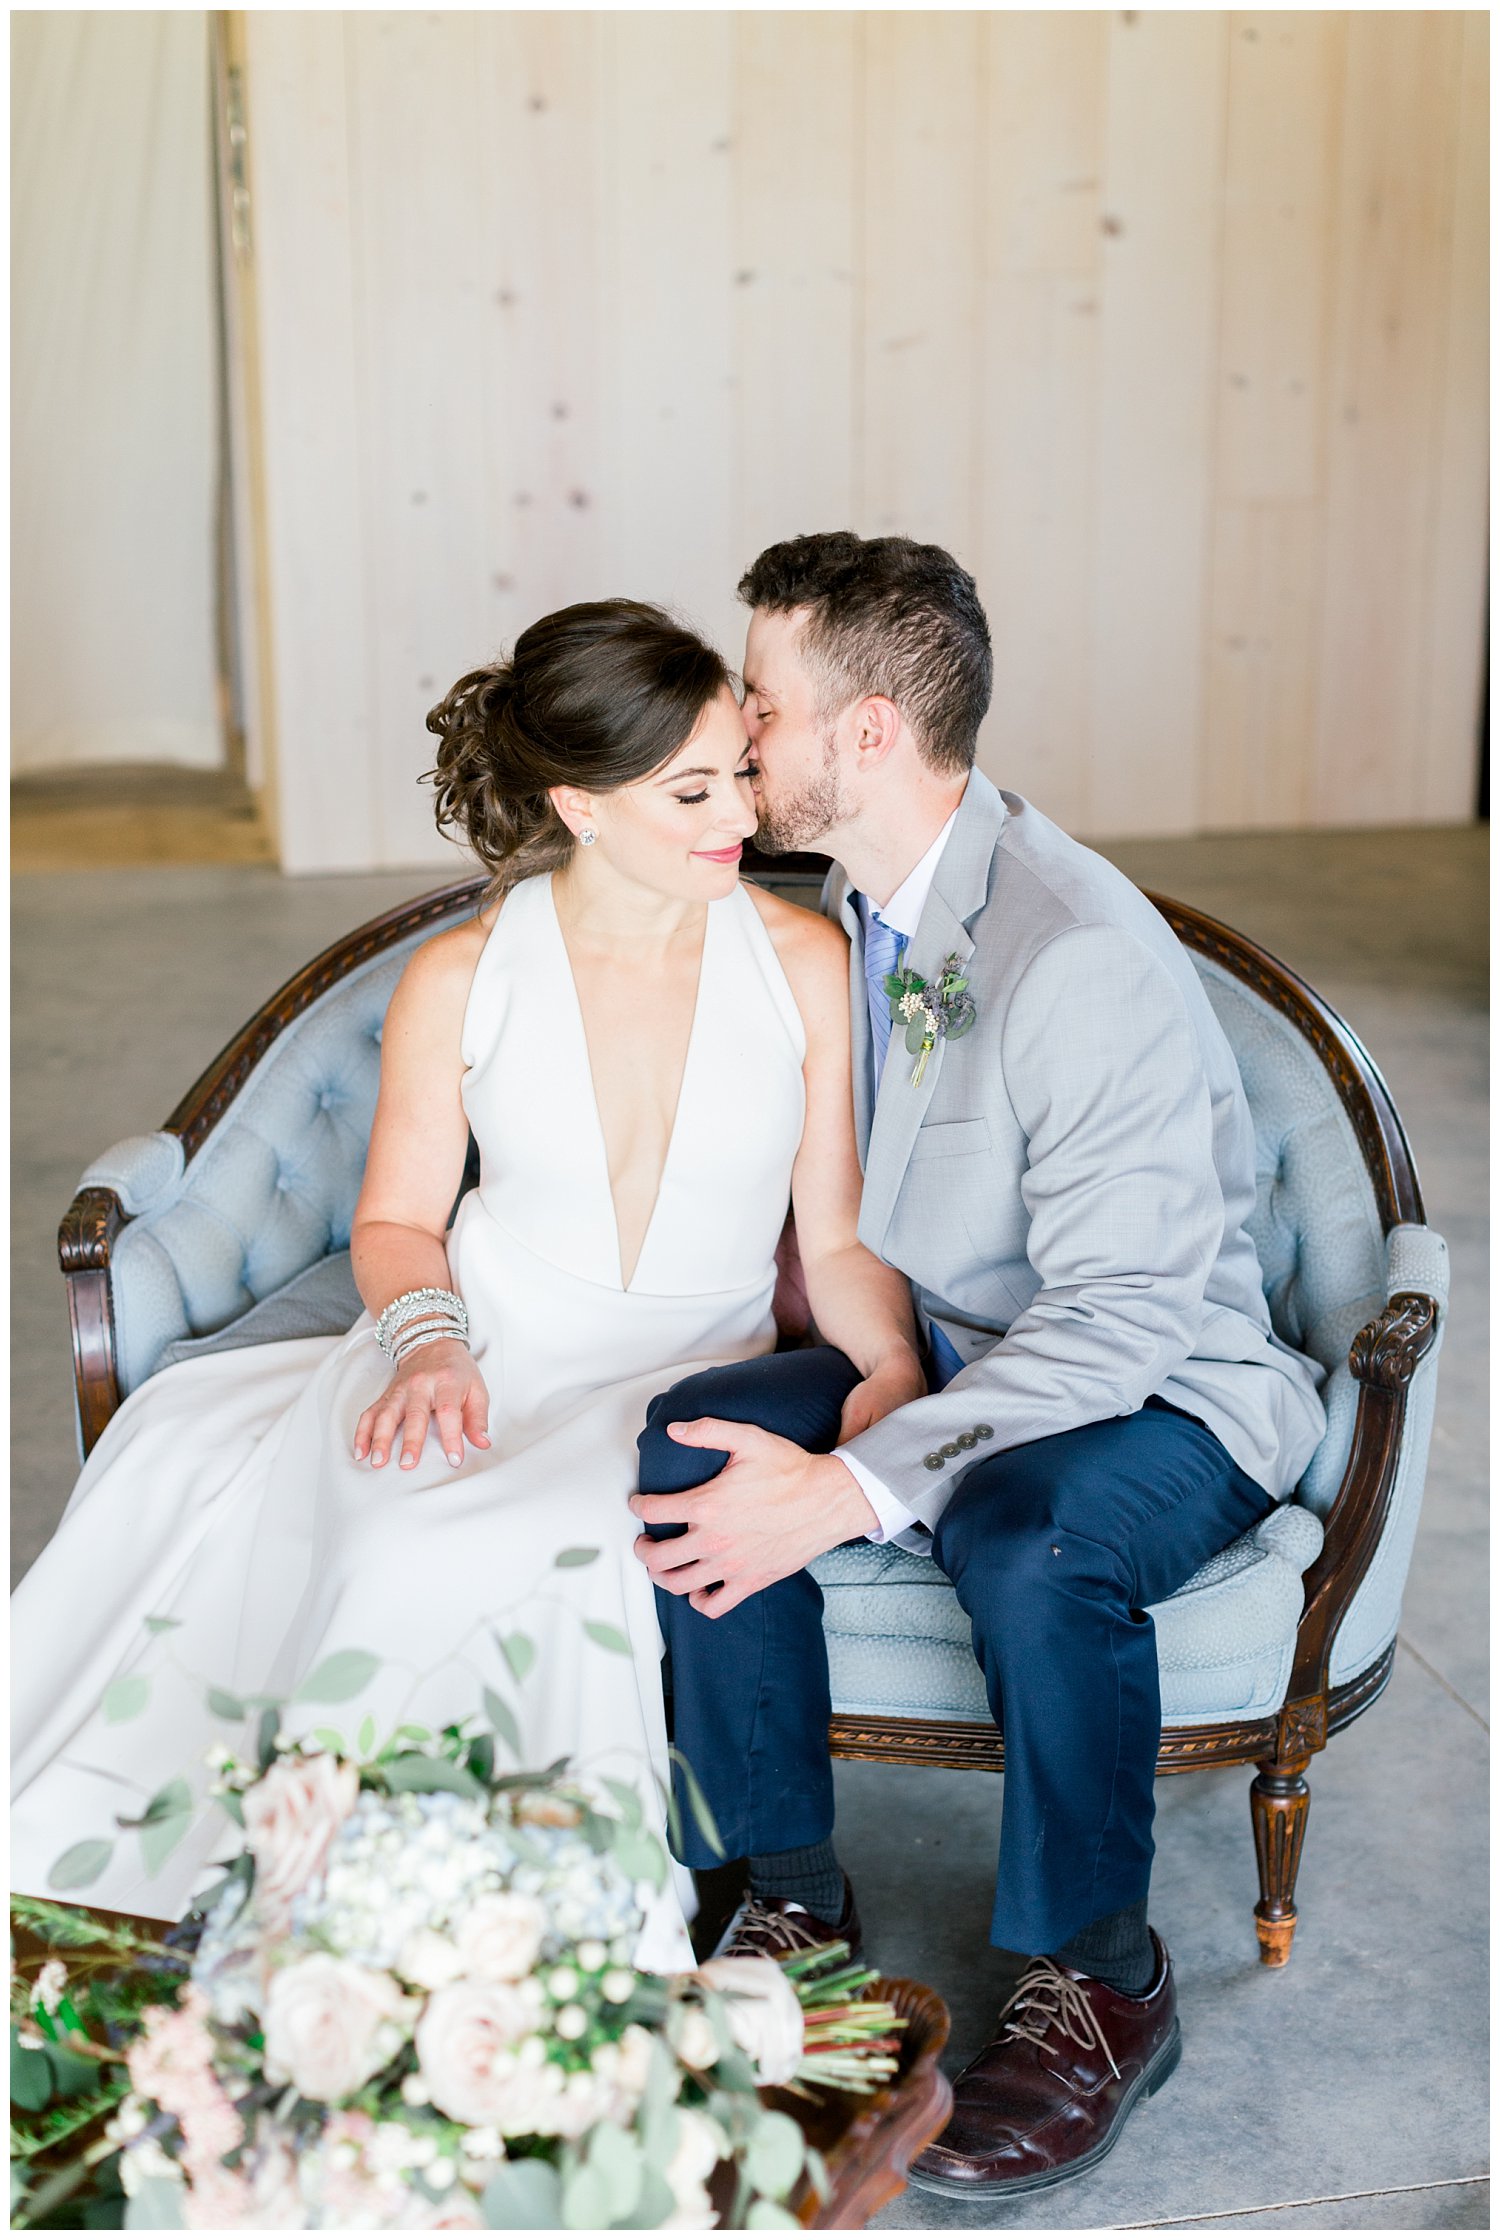 Blue and blush French Country wedding at Dove Meadows Samantha Laffoon Photography